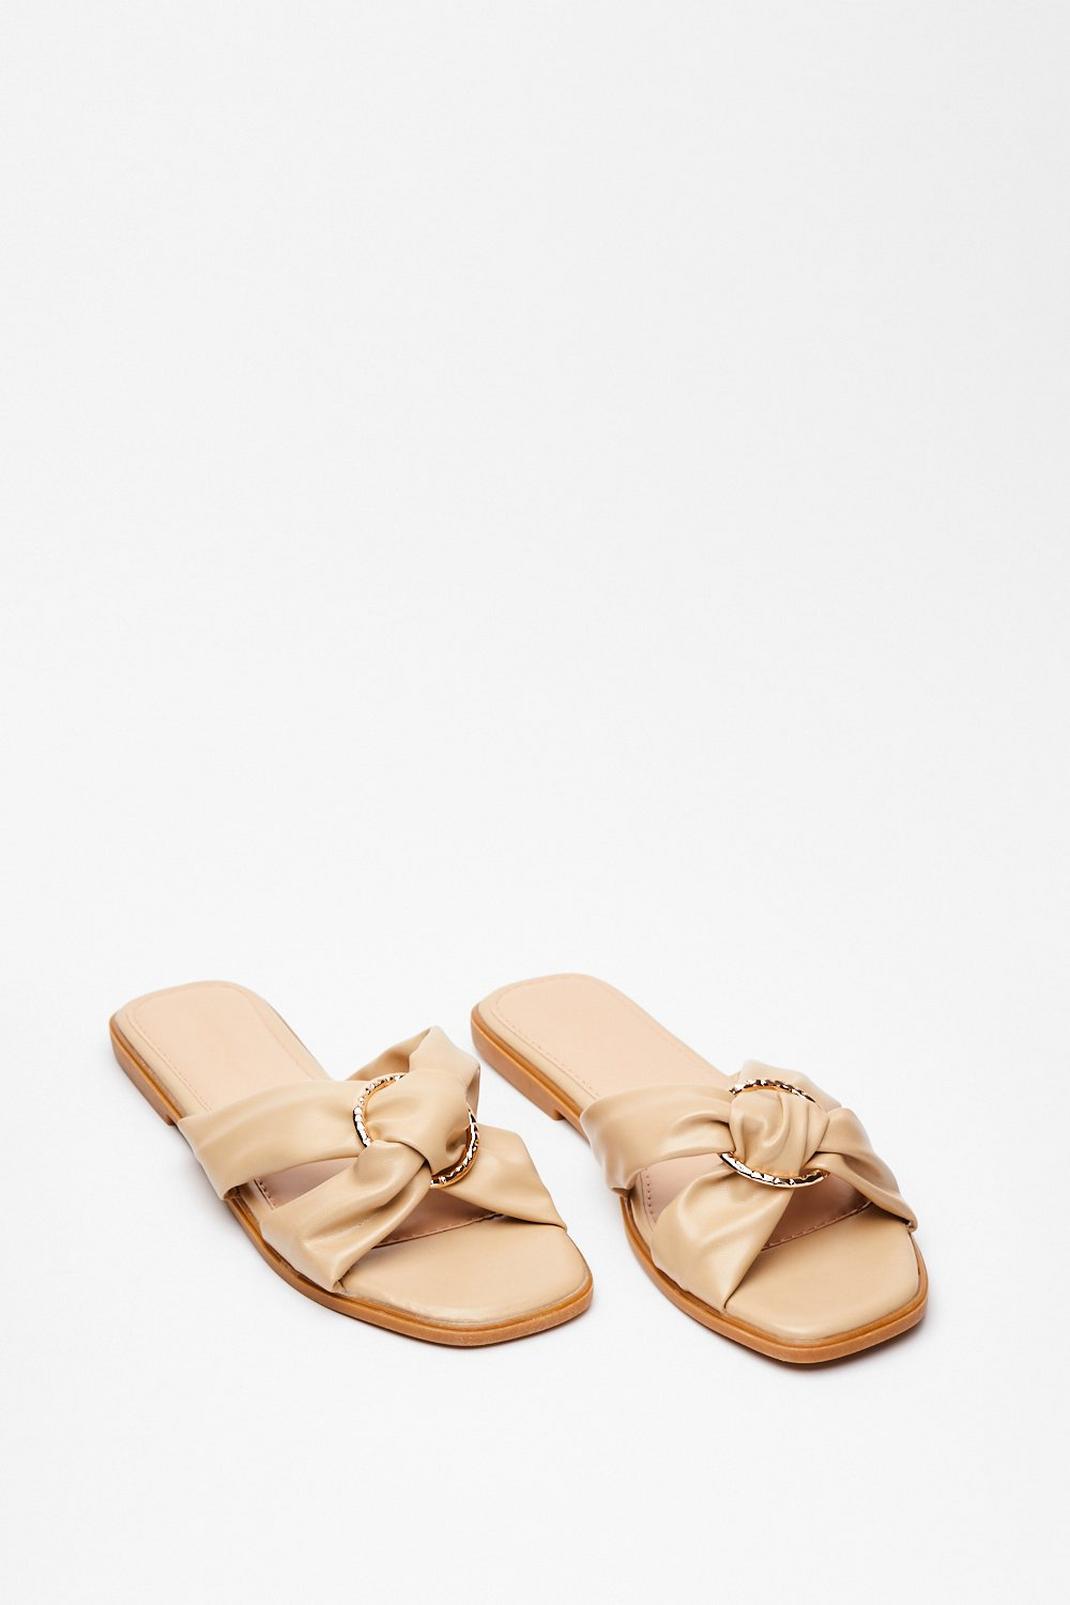 We're Going in Circles Criss Cross Flat Sandals image number 1